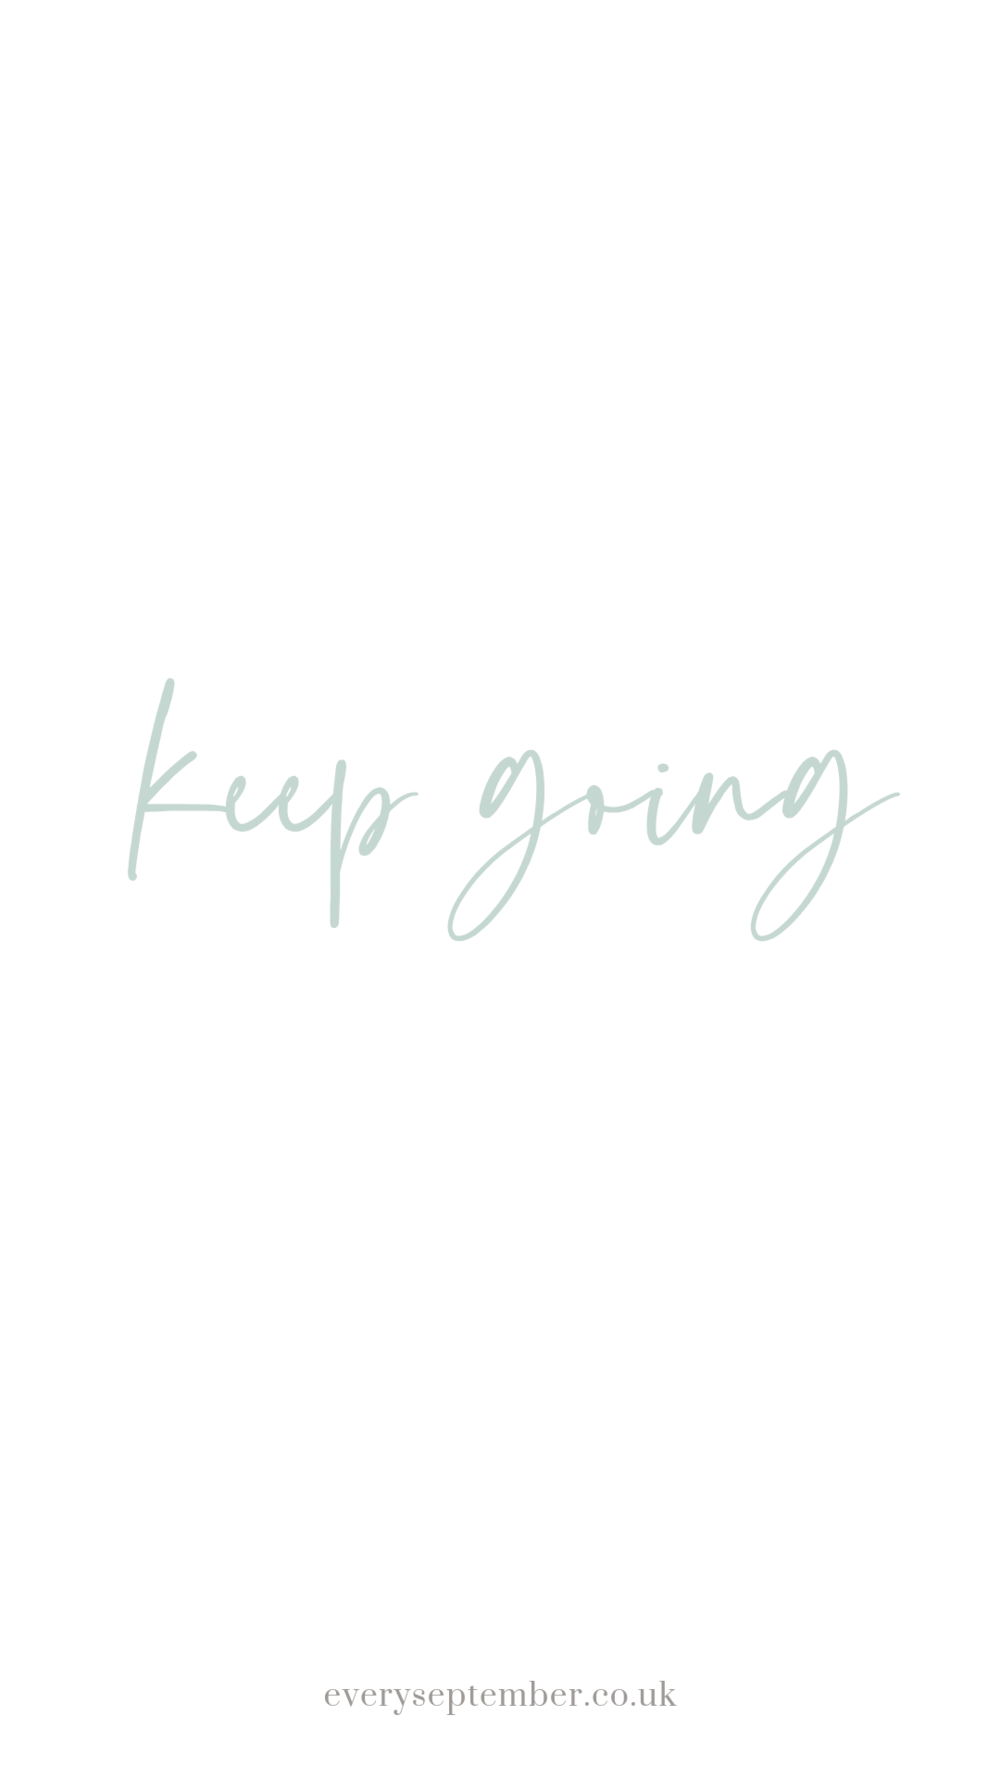 Just keep going wallpaper  Just keep going Home decor decals Words